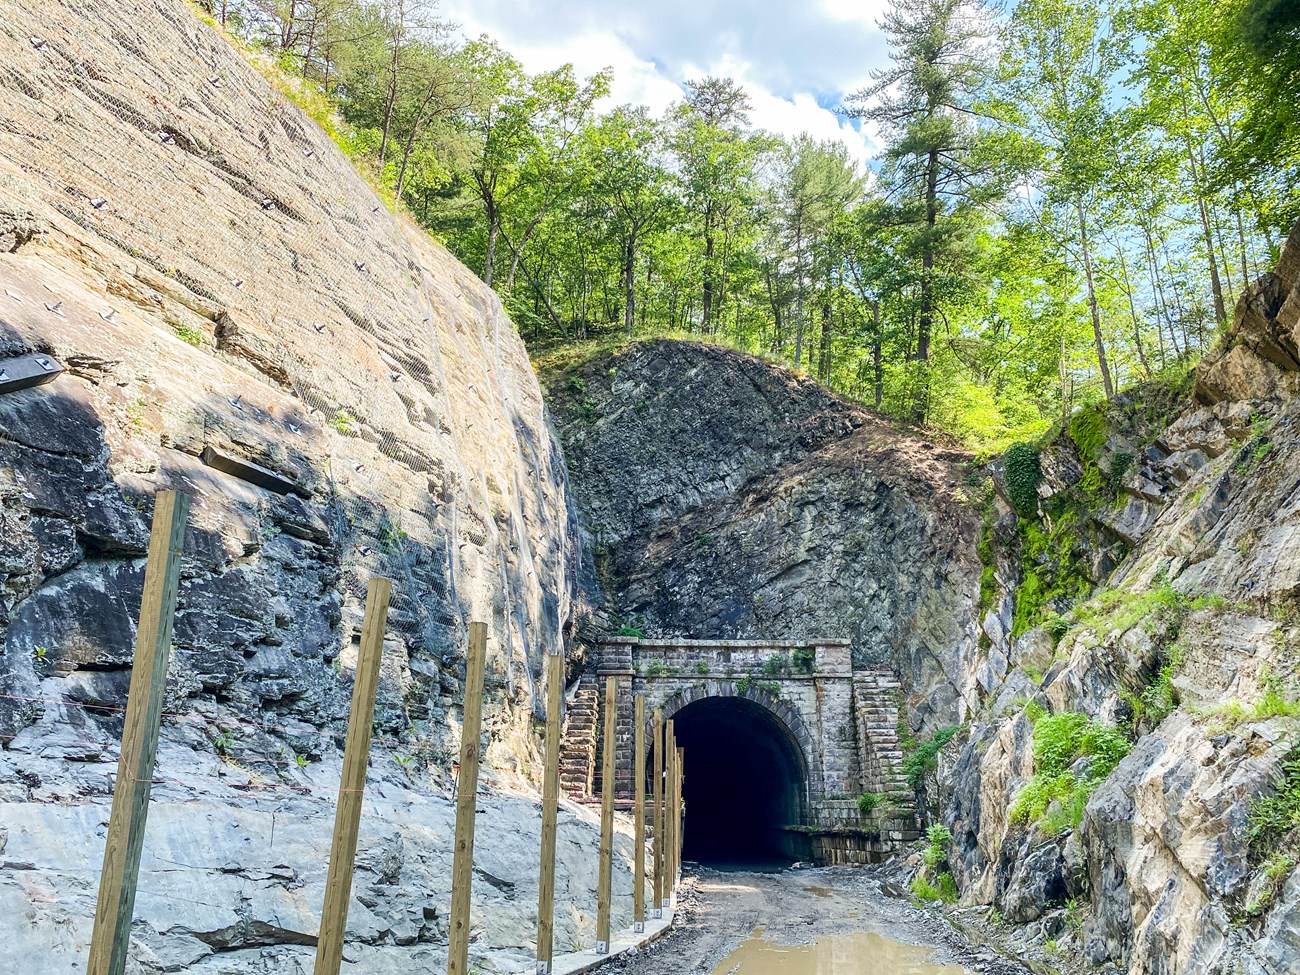 The Paw Paw Tunnel, a gray stone structure through a mountain, is shown in the background with a wooden boardwalk in the foreground